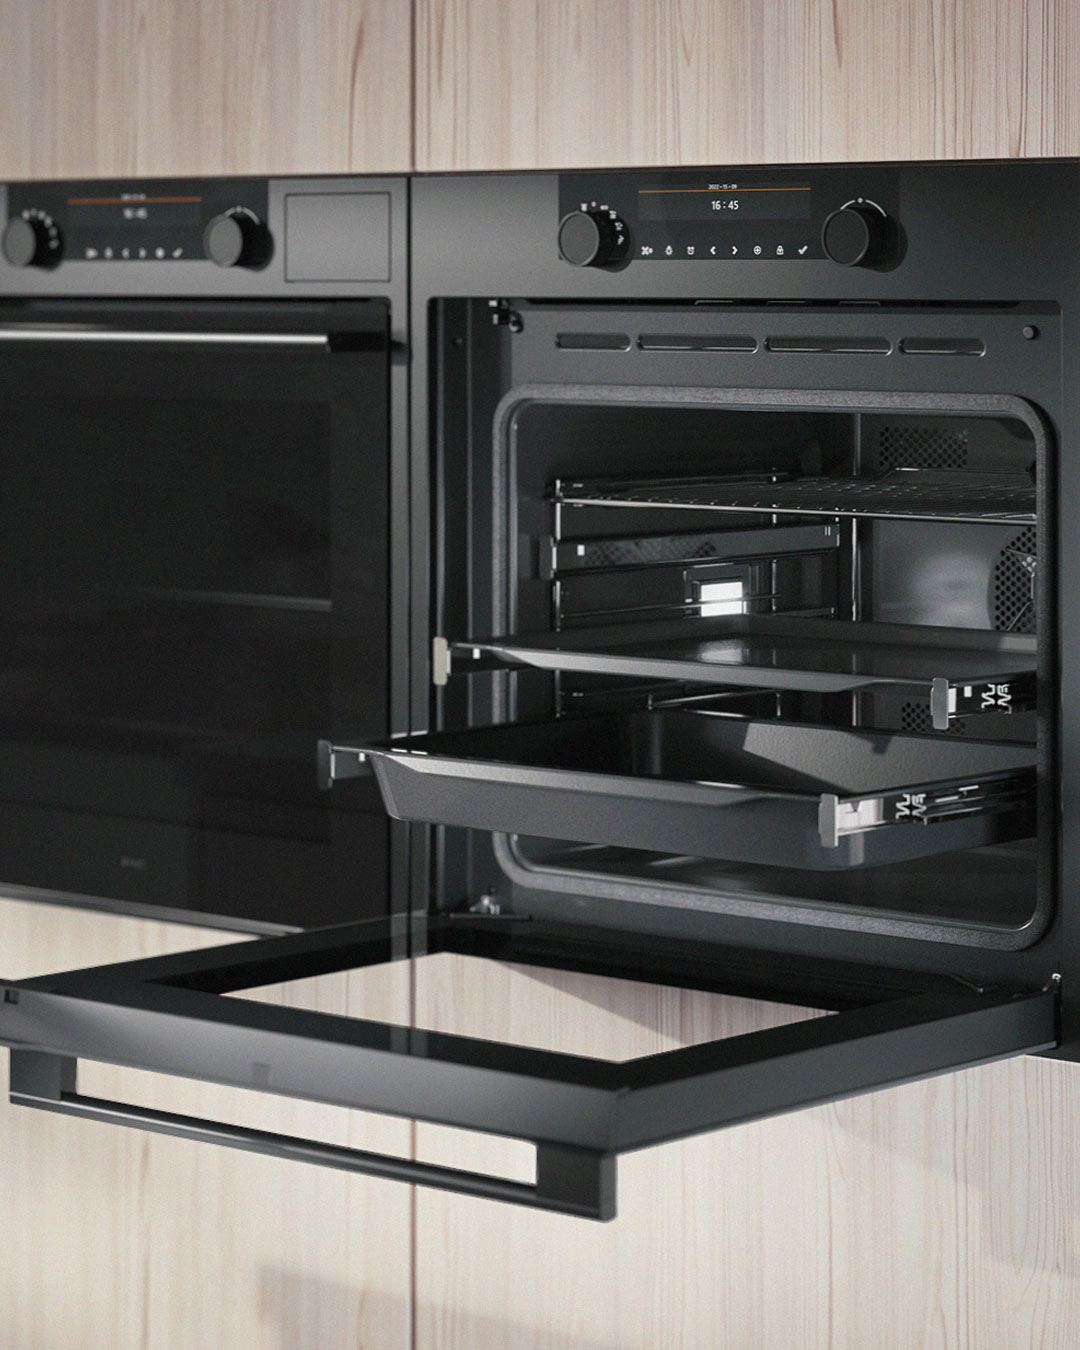 asko-amb-oven-features-banner-mobile.jpg